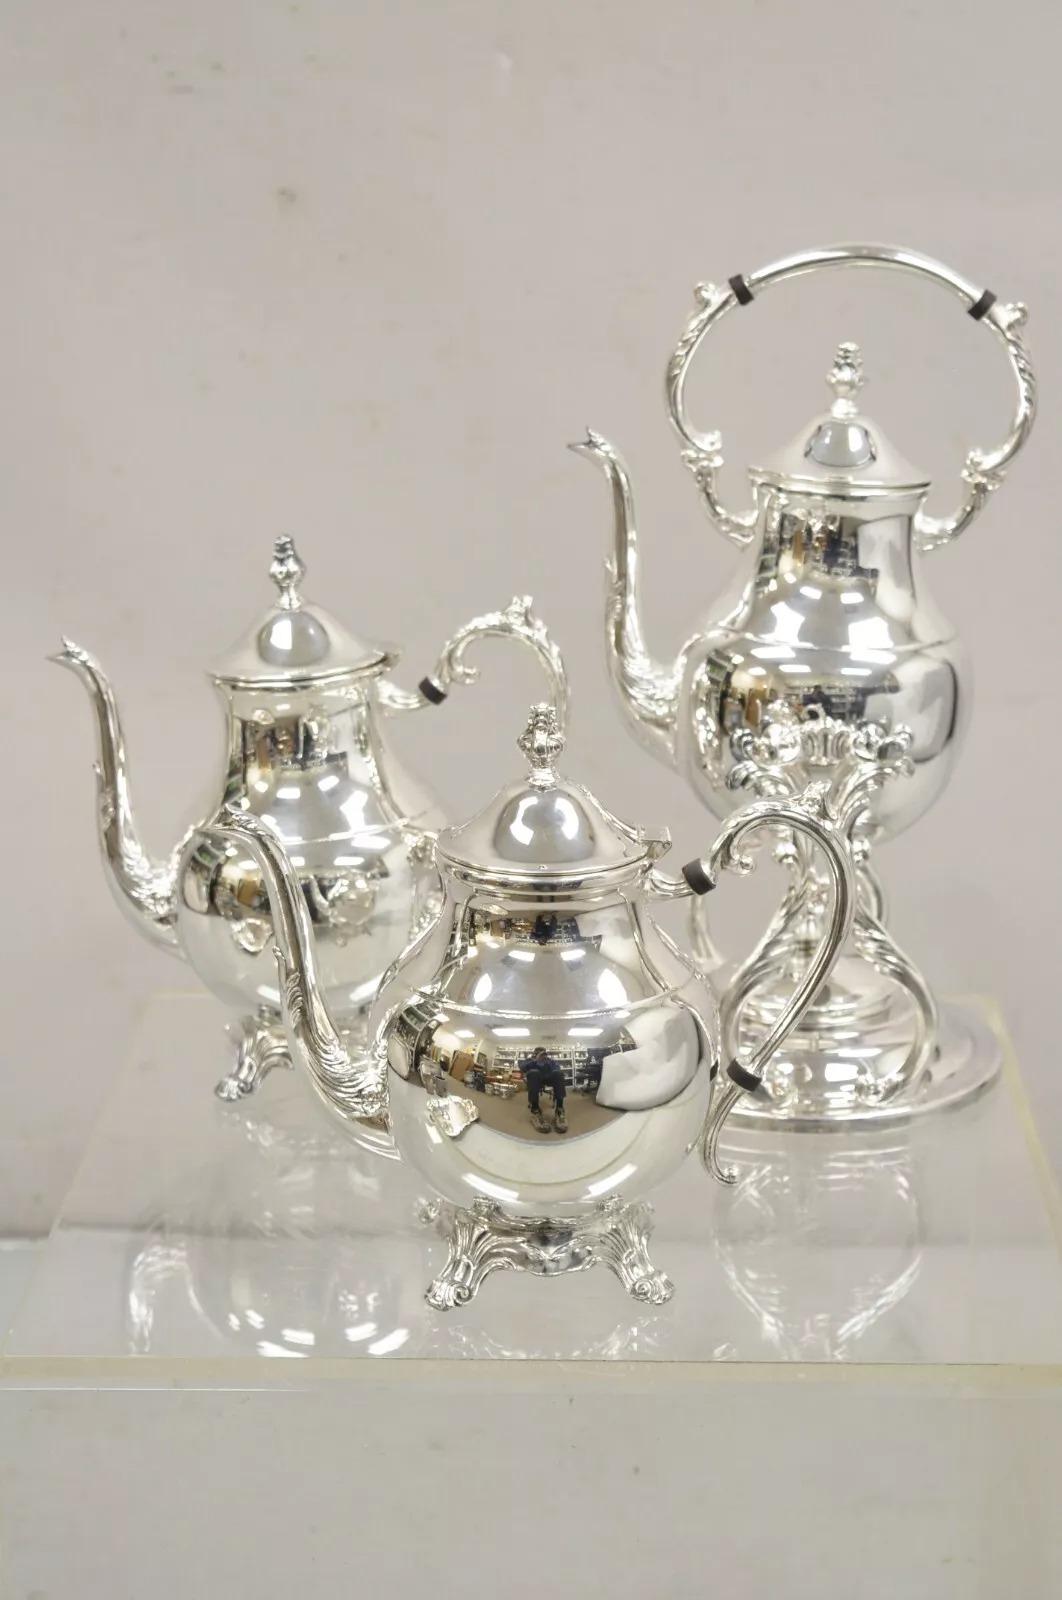 20th Century Vintage FB Rogers Victorian Silver Plated Tea Set with Tilting Pot - 6 Pc Set For Sale